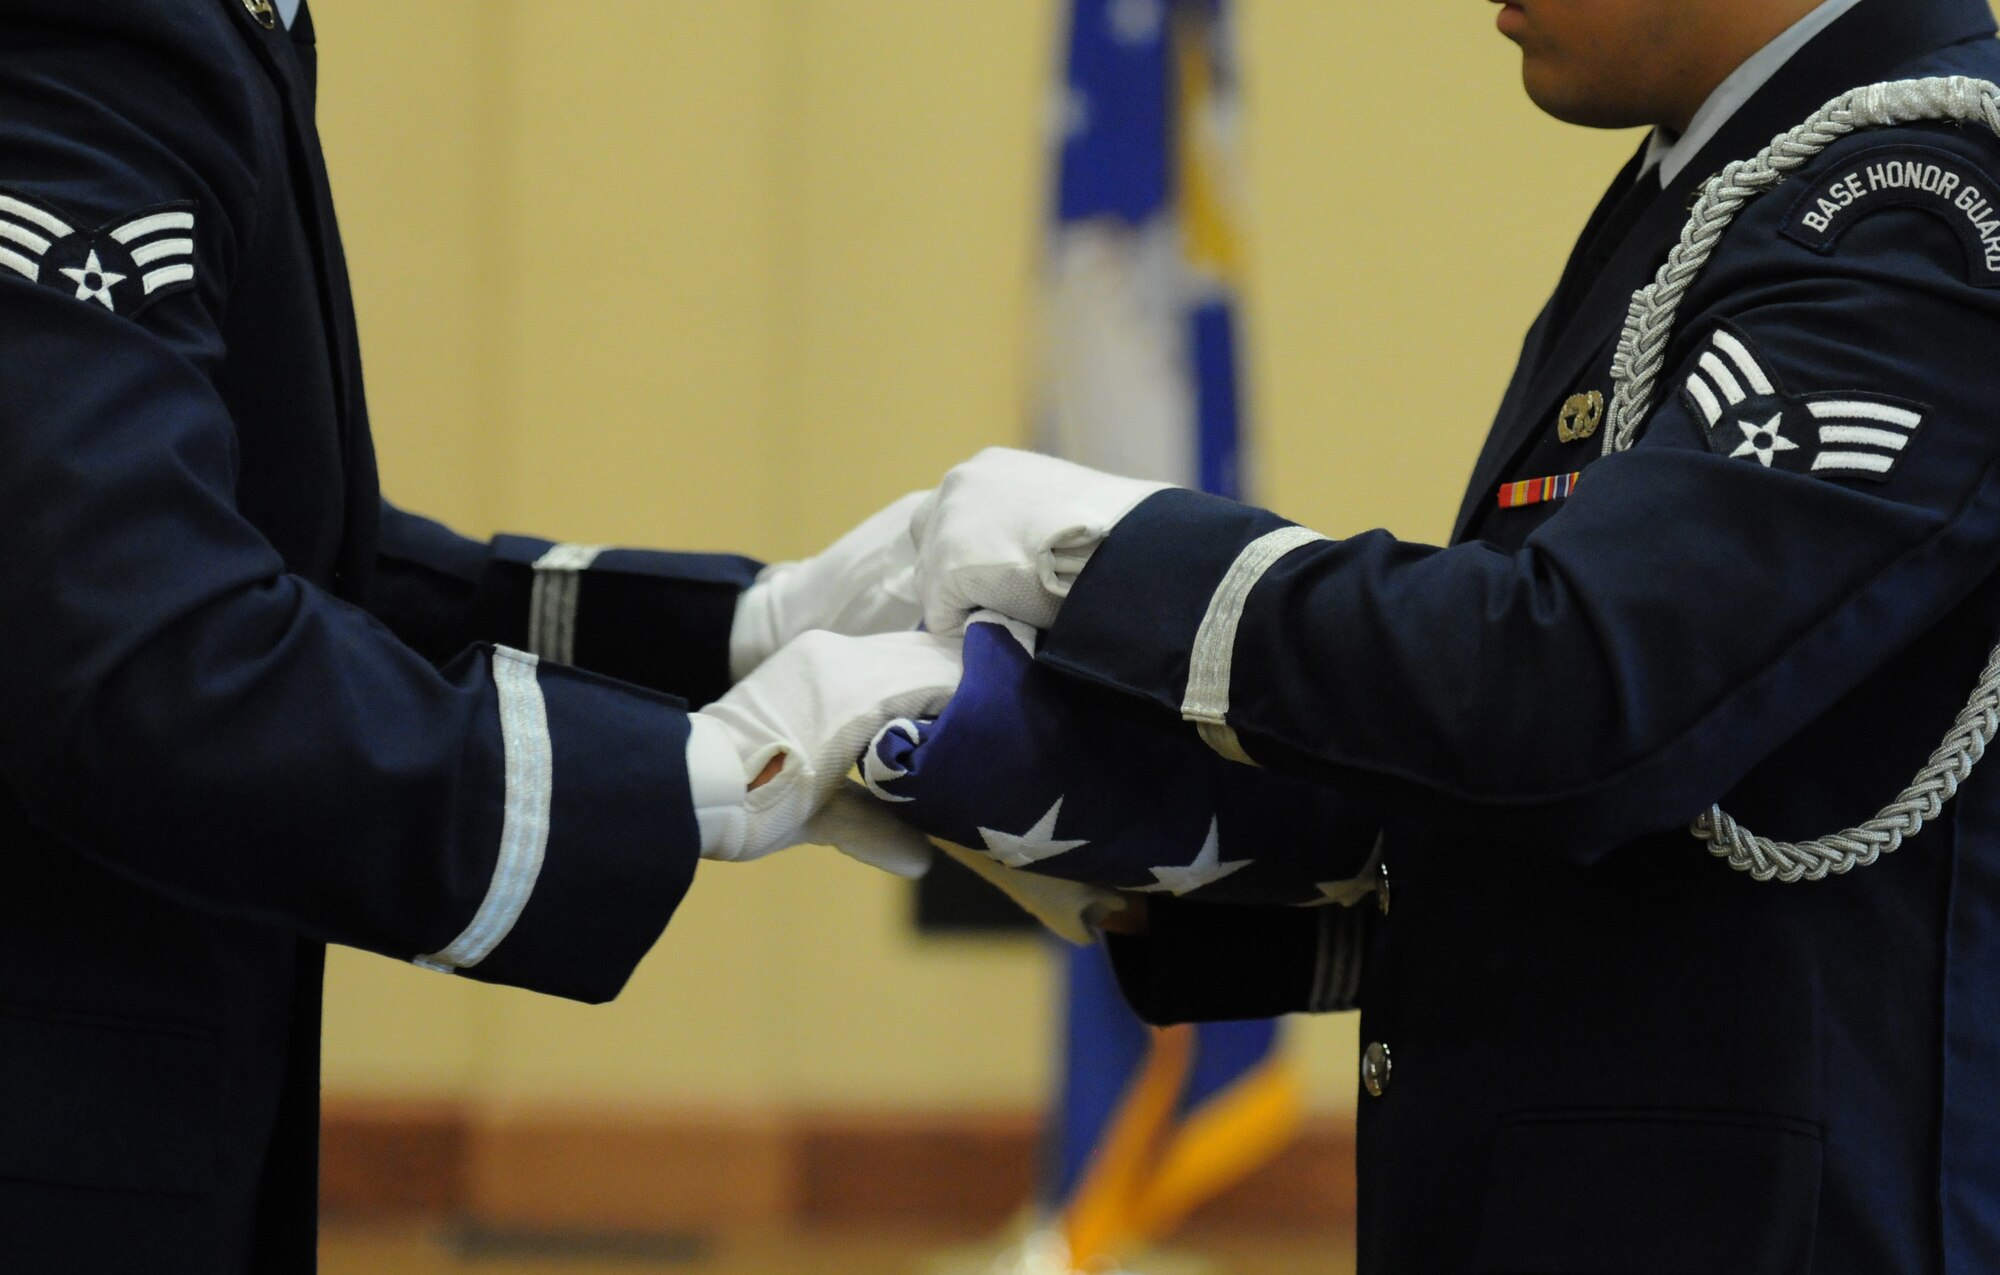 The Keesler Honor Guard folds the U.S. flag during the retirement ceremony for Col. Dennis Scarborough, 81st Training Wing vice commander, at the Bay Breeze Event Center June 28, 2016, on Keesler Air Force Base, Miss. Scarborough retired with 27 years of military service. He has served multiple tours as an F-15C instructor and evaluator and has held positions in the fields of defense policy, operational plans, safety and aircraft maintenance. He has commanded at the squadron level and served as an operations group deputy commander. (U.S. Air Force photo by Kemberly Groue/Released)